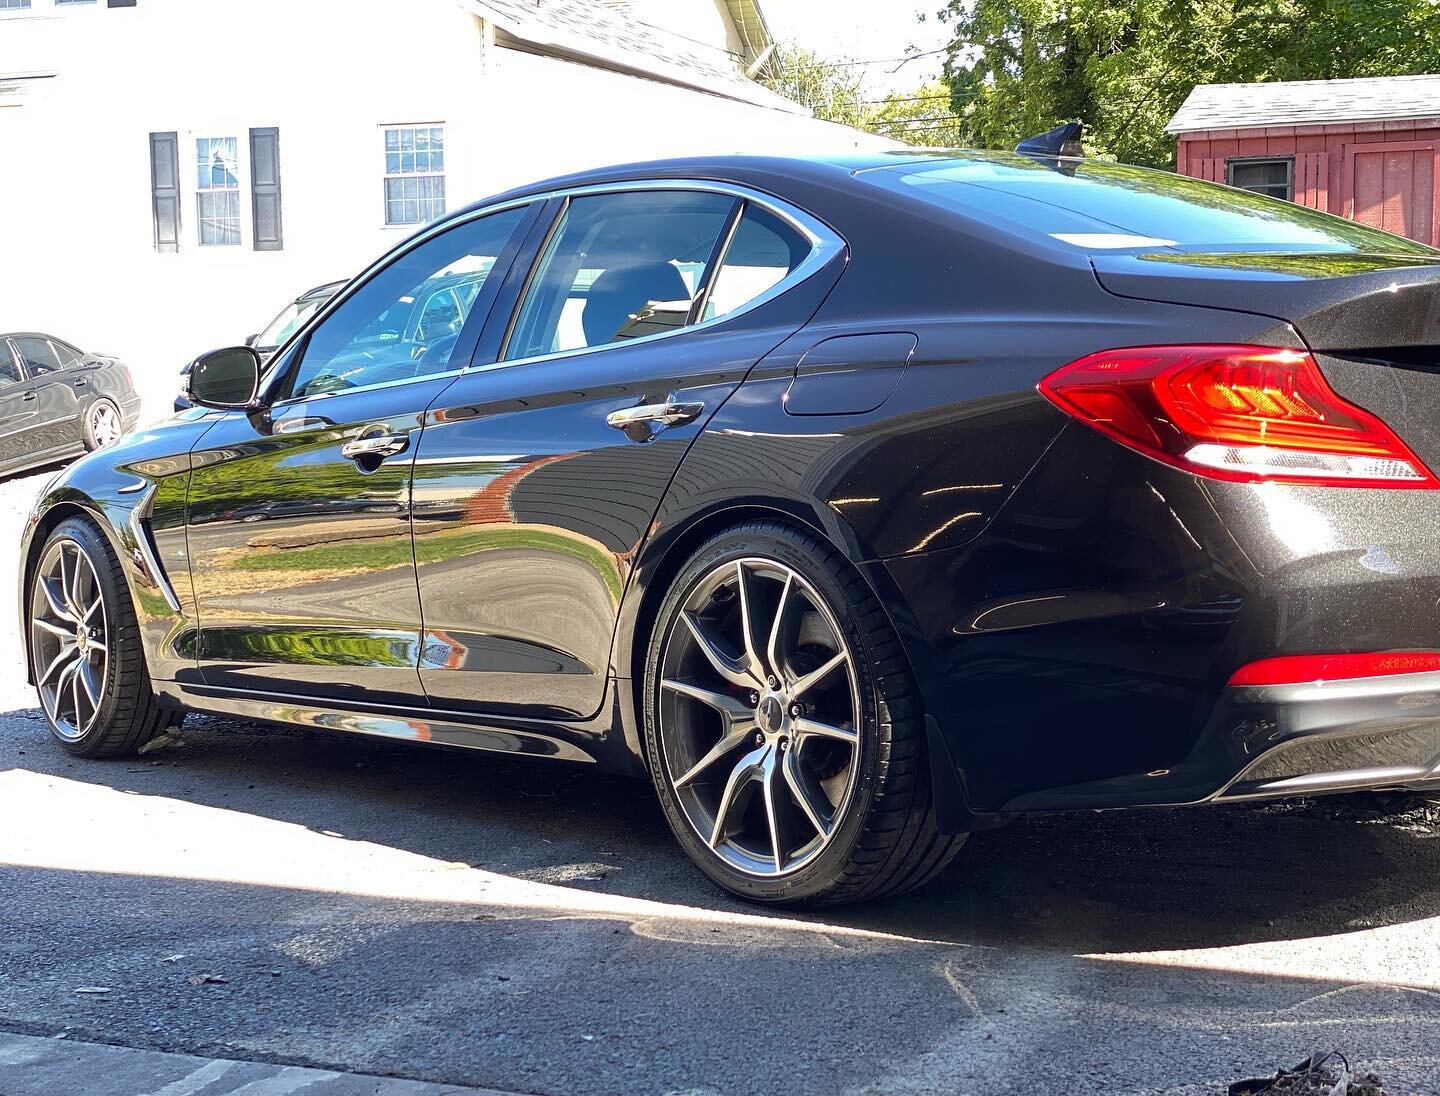 This Genesis came by for our level 0 prep and polishing package, as full exterior coverage in @iglcoatings Ceramic Coatings, making maintenance cleanings an absolute breeze for years to come. Reach out to schedule your vehicle for all paint polishing